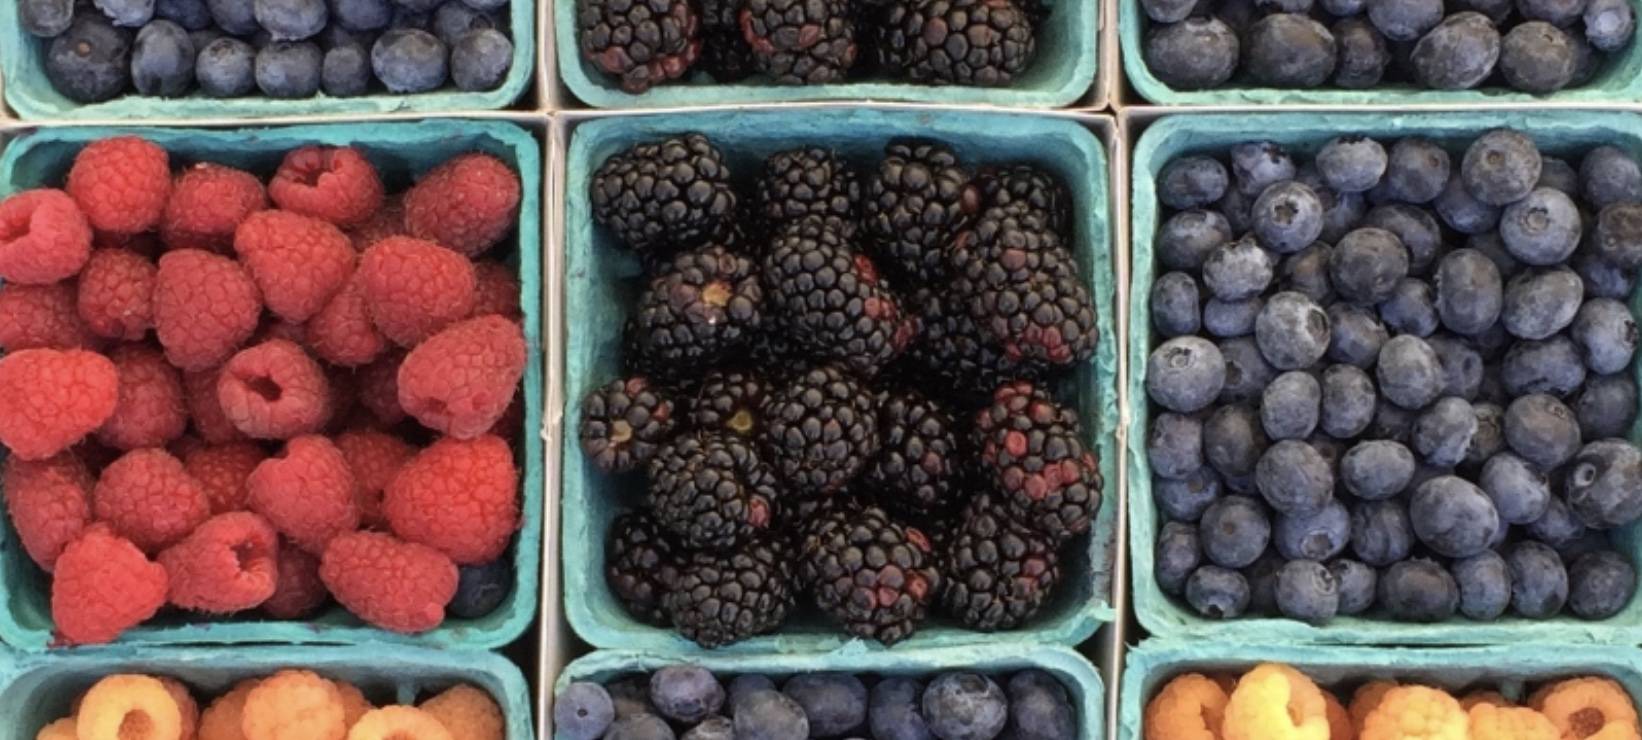 Photo of berries in their containers